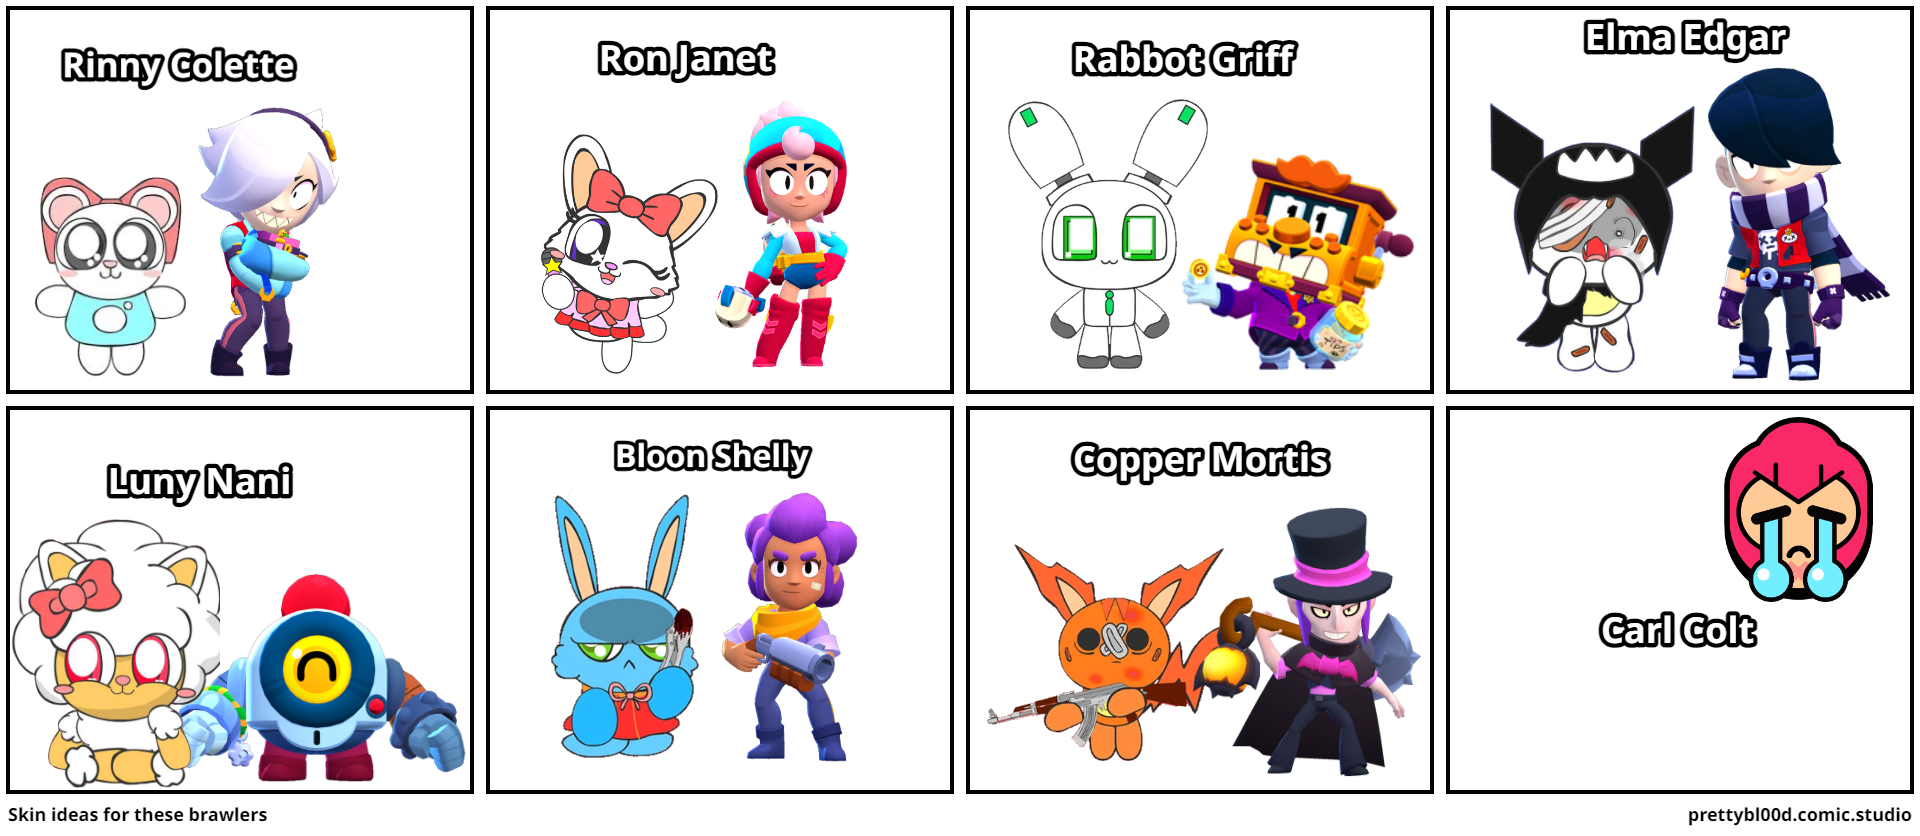 Skin ideas for these brawlers